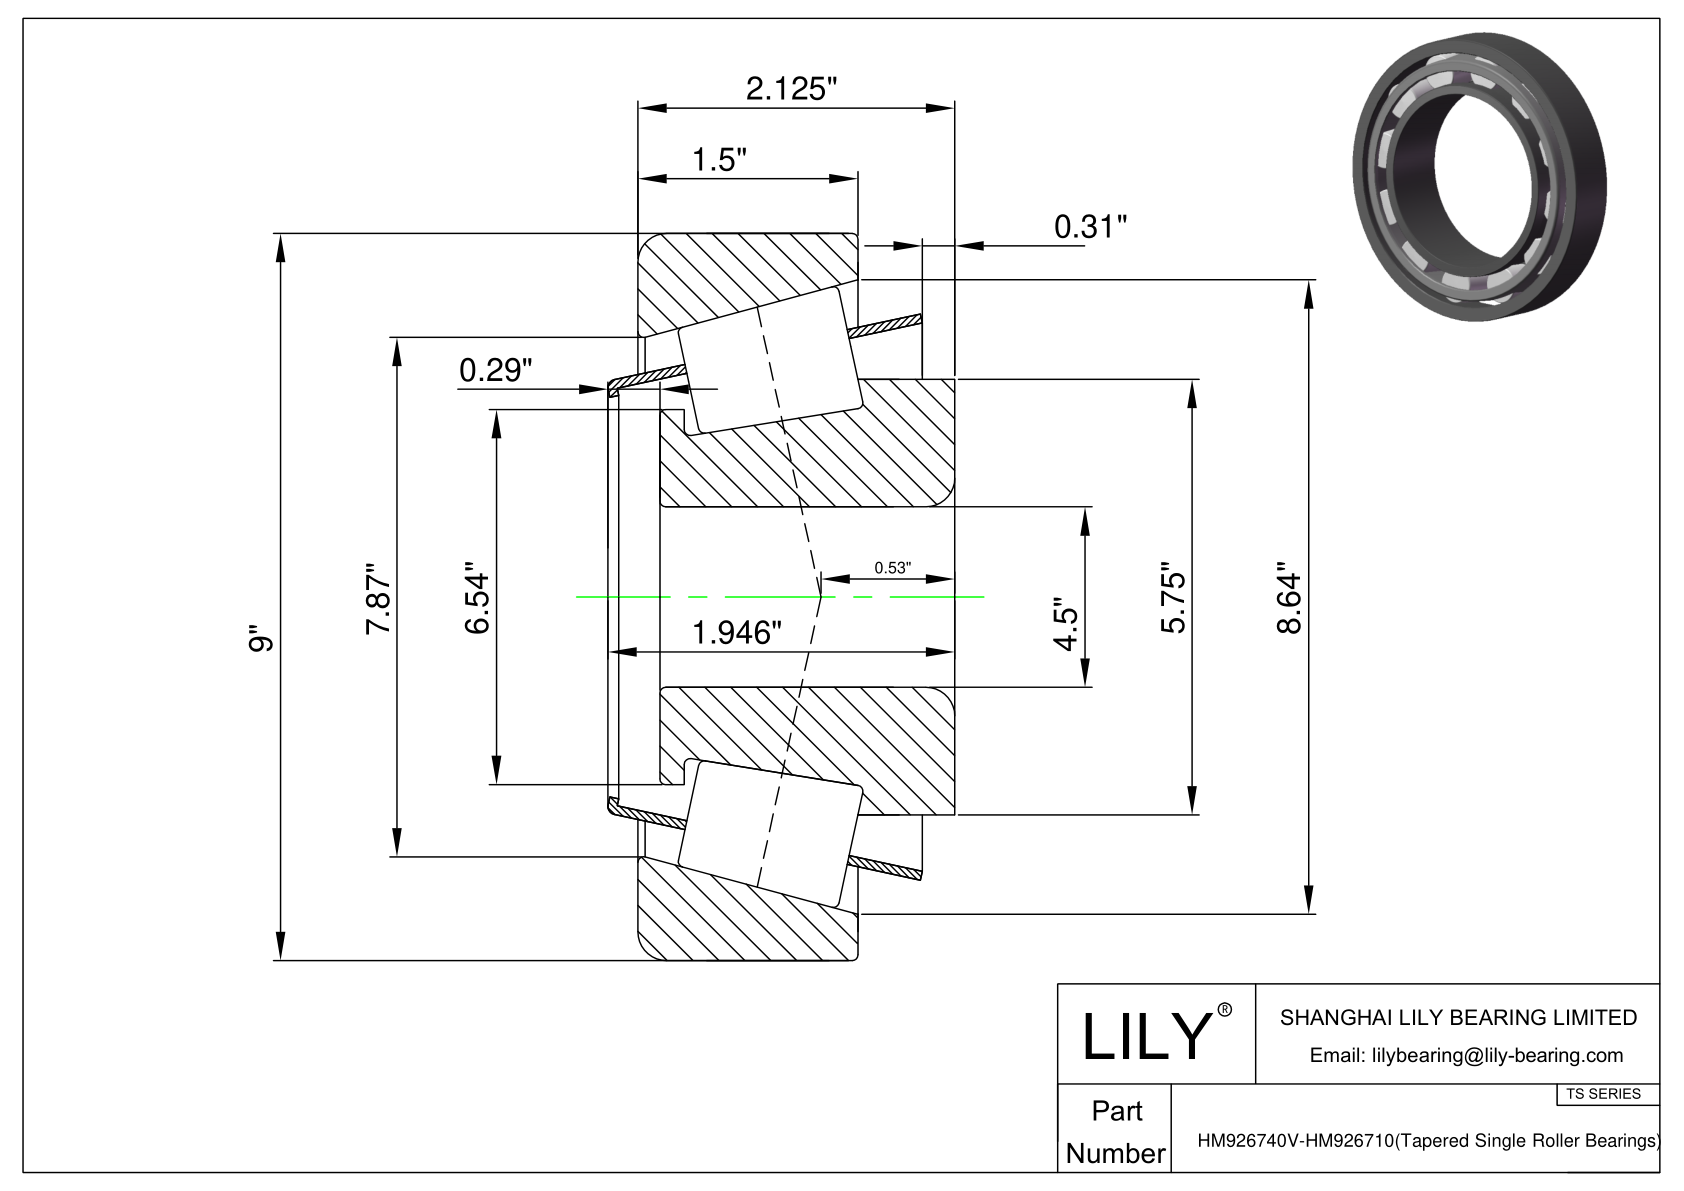 HM926740V-HM926710 TS (Tapered Single Roller Bearings) (Imperial) cad drawing